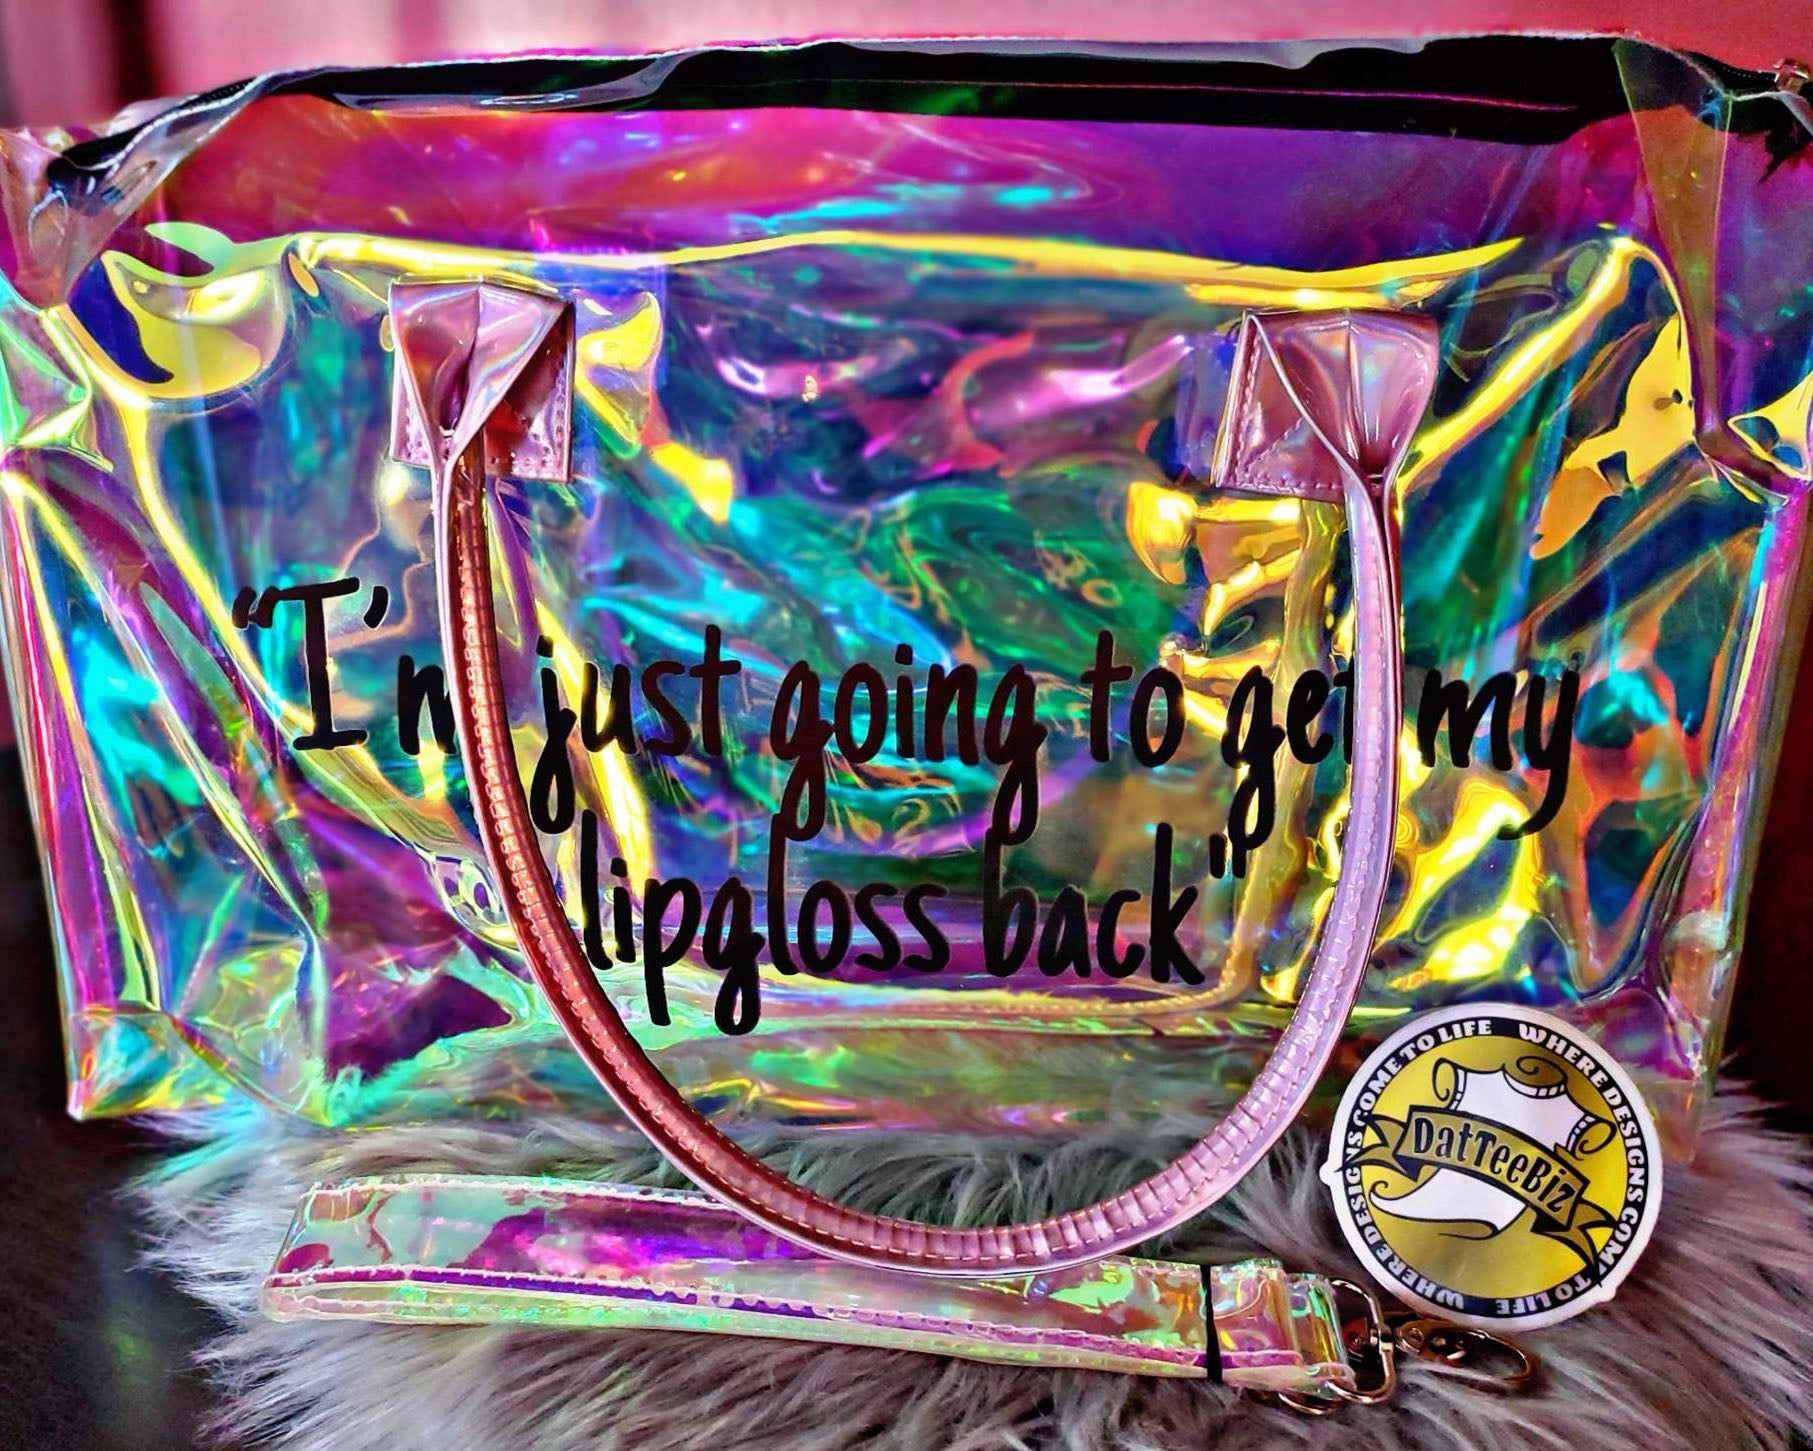 It all started with that damn spinnanight bag😂 Video inspired by